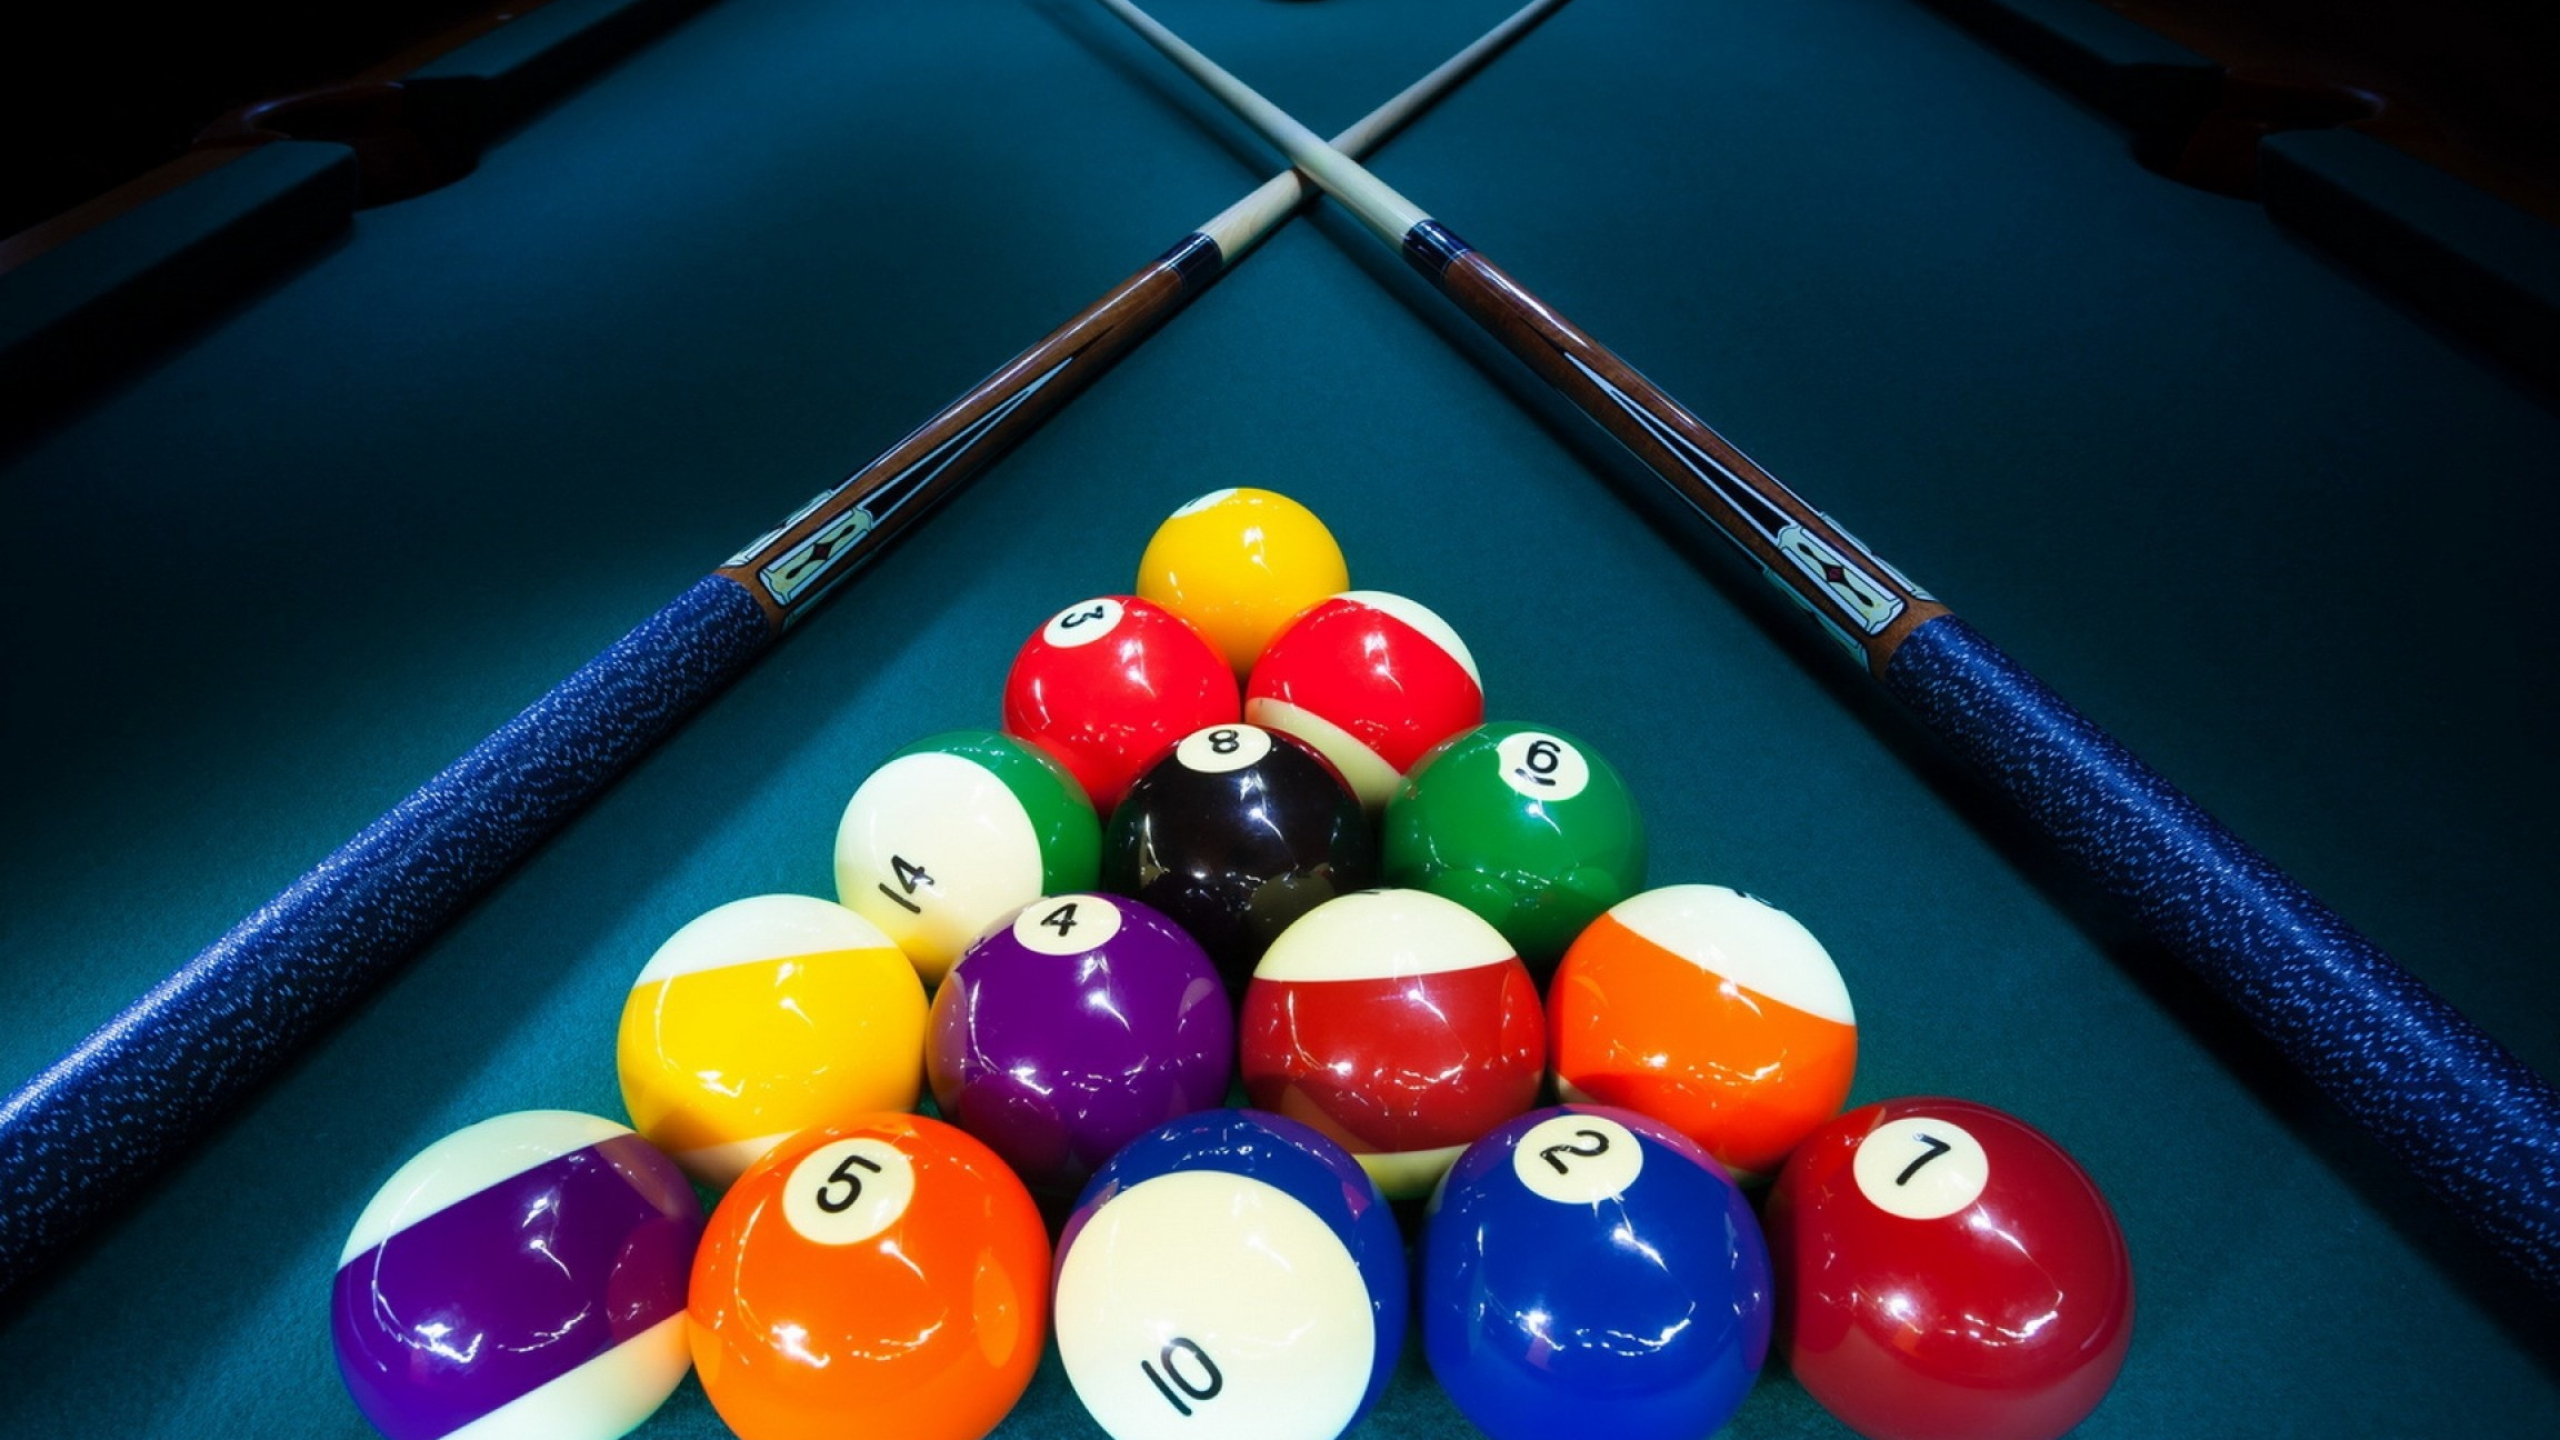 Cue Sports: Two cue sticks and fifteen object balls, Equipment for an eight-ball style of a snooker. 2560x1440 HD Background.